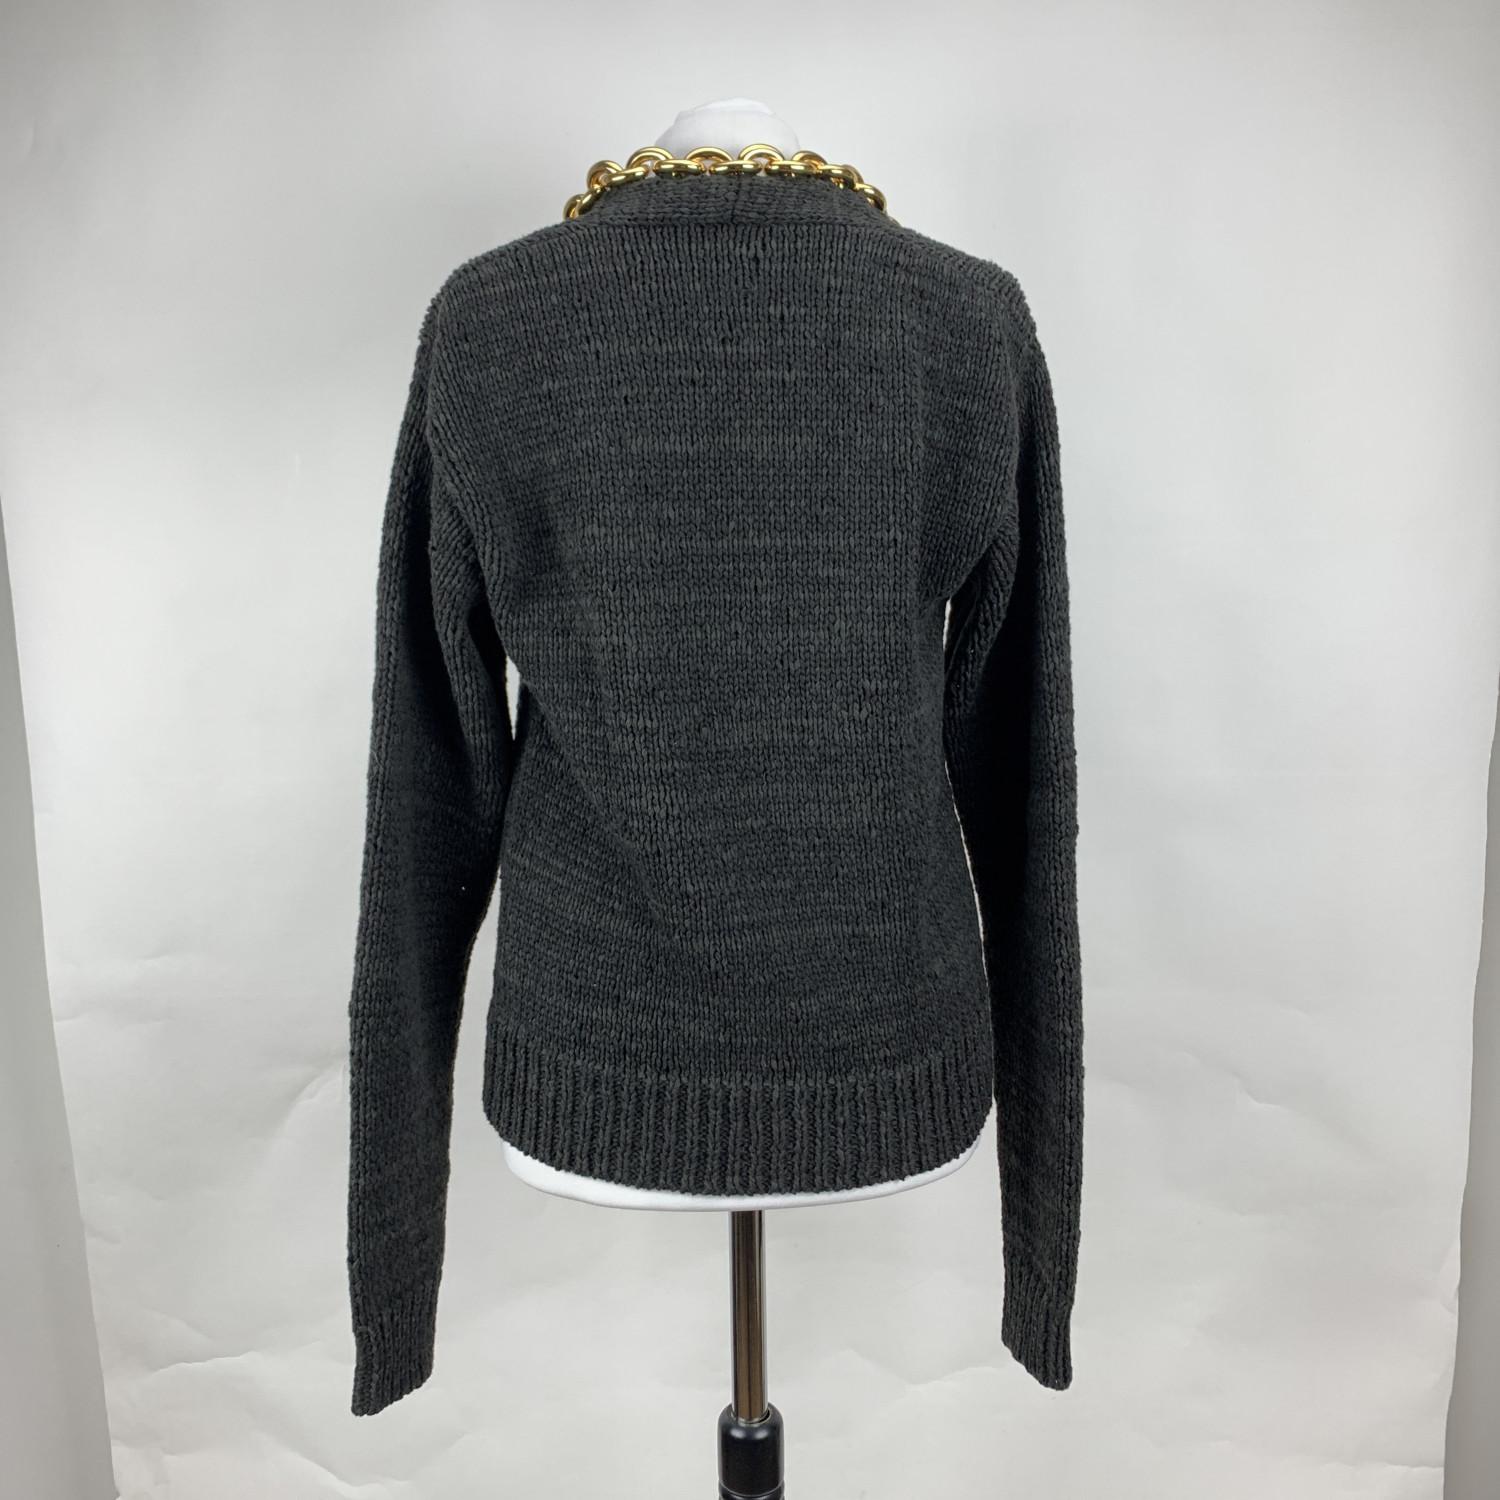 Bottega Veneta dark grey cotton sweater with gold metal chain chain detailing (the color of the sweater is a mixture of dark gray and brown). From the 2020 Pre-Fall collection. Knitted design, V-neck, long sleeve styling and straight hem.